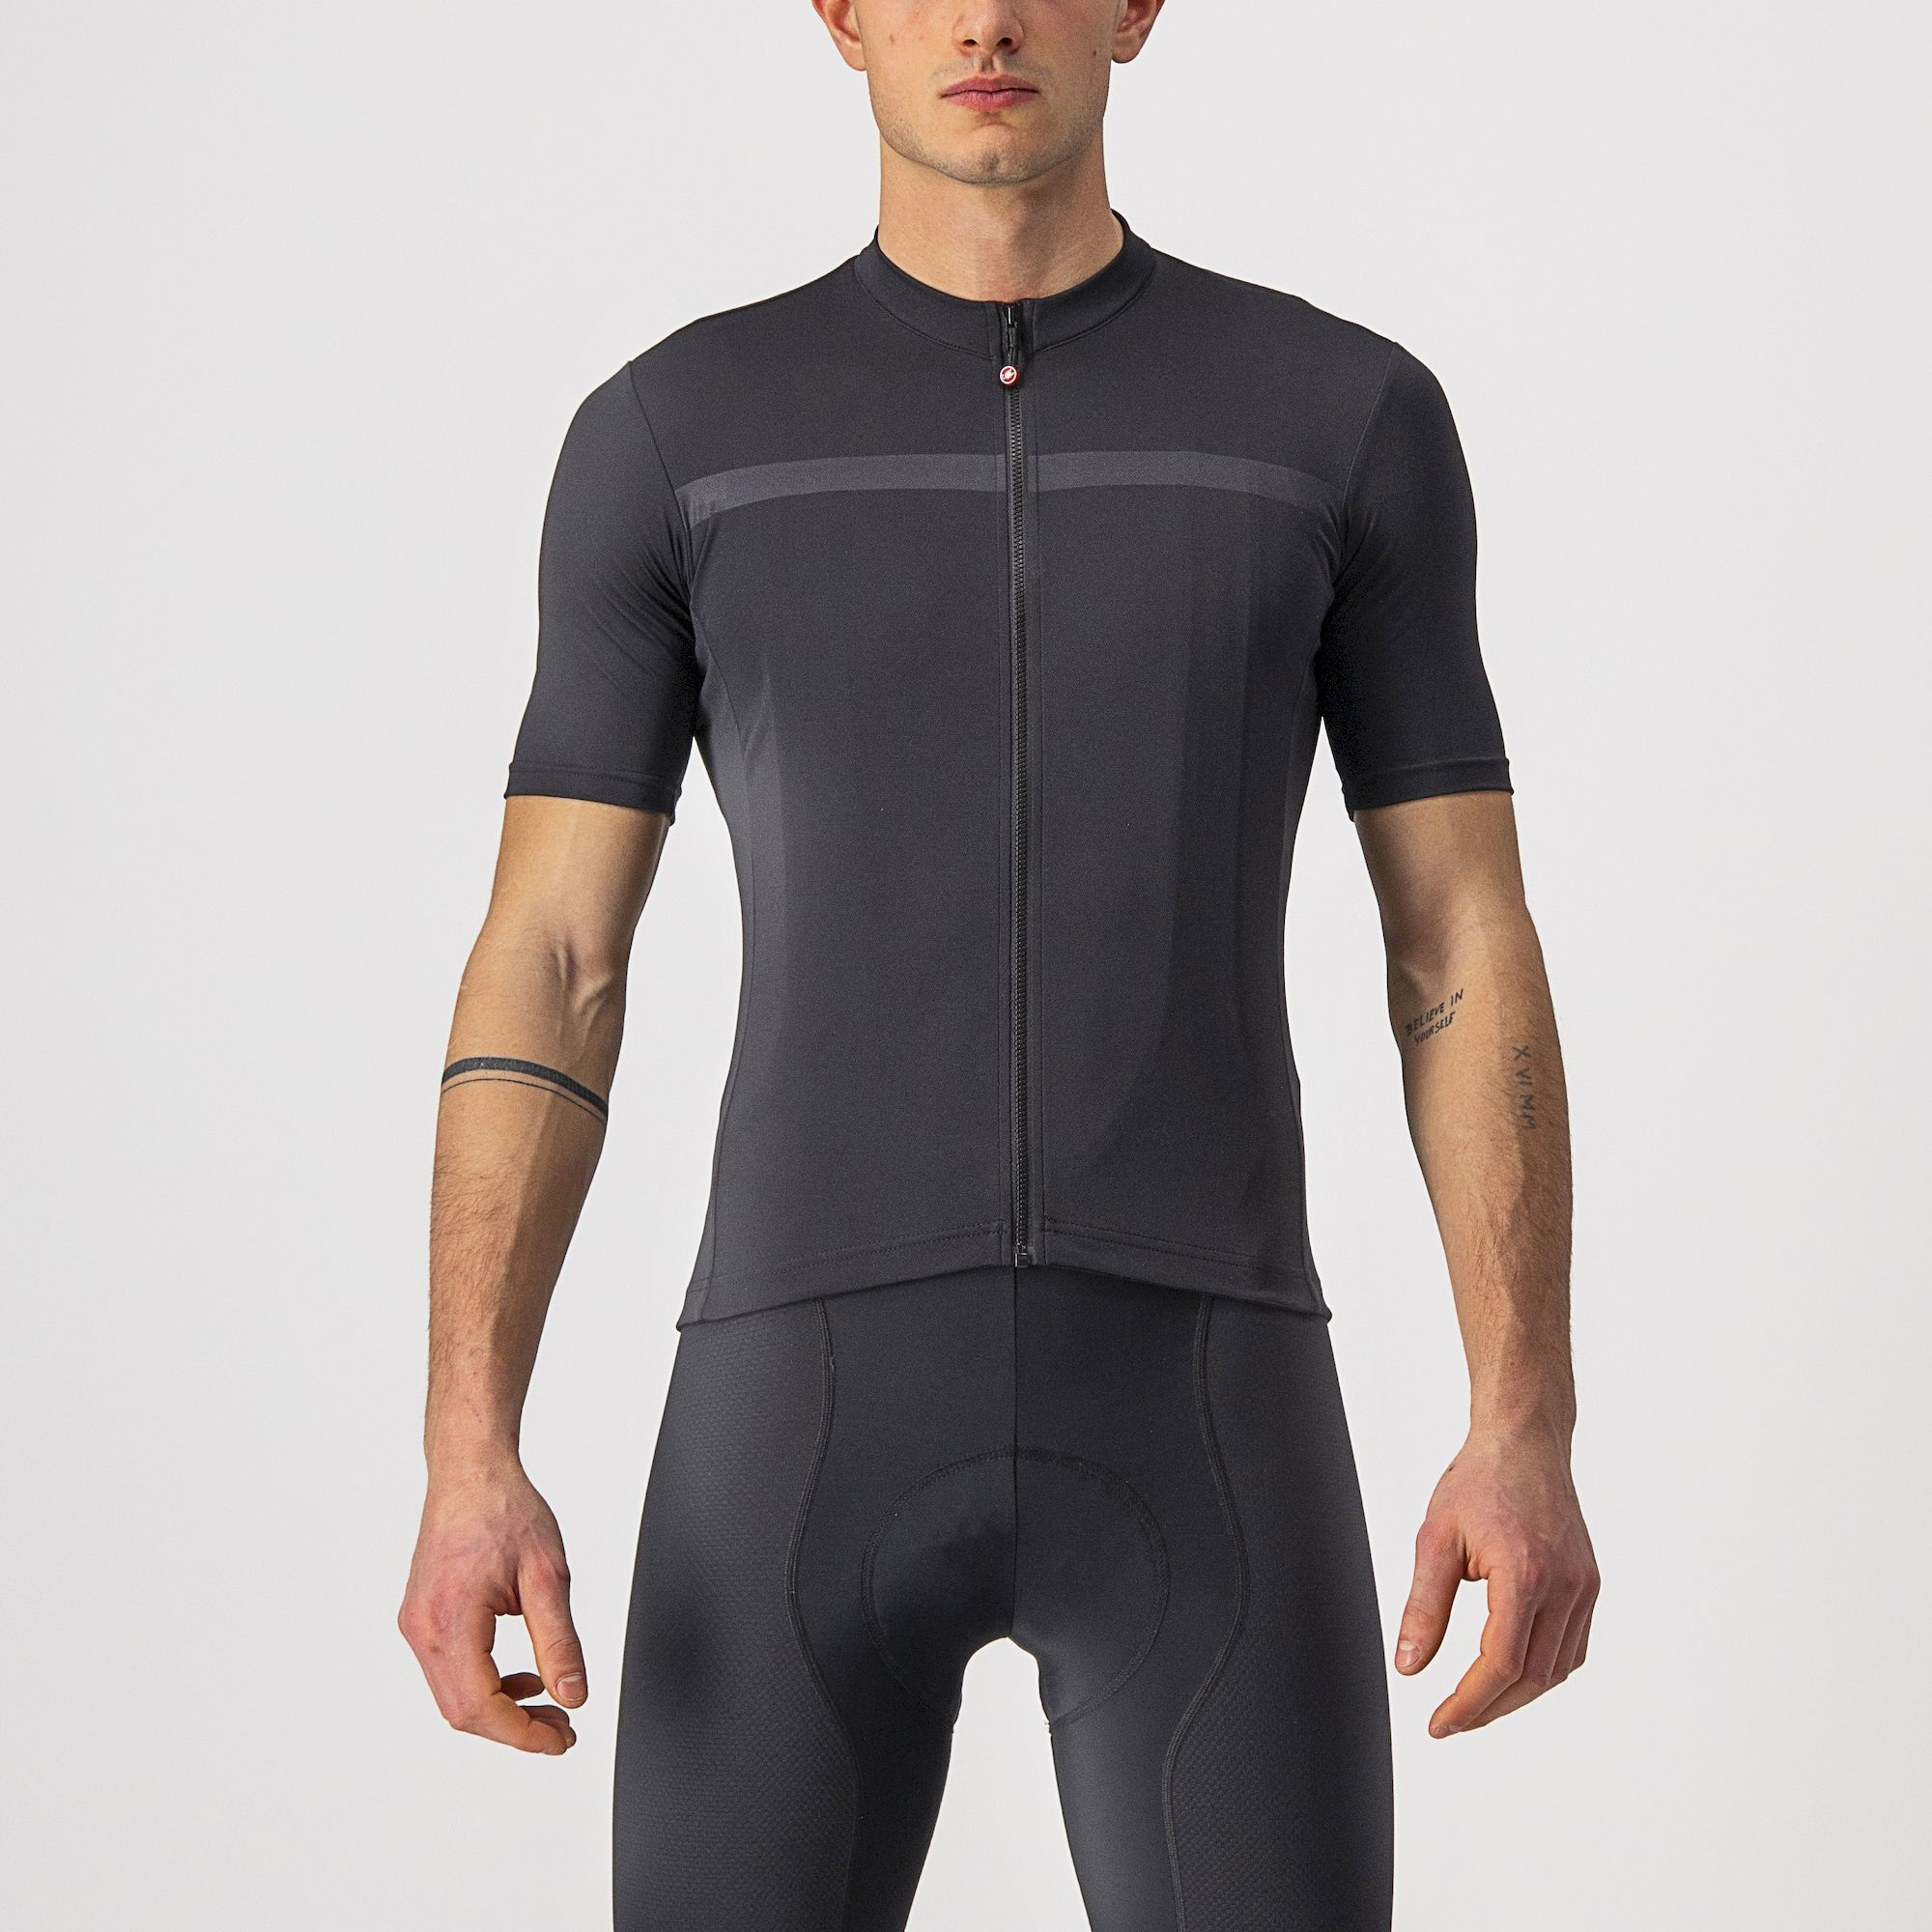 Castelli Classifica Jersey - Maillot vélo homme | Hardloop